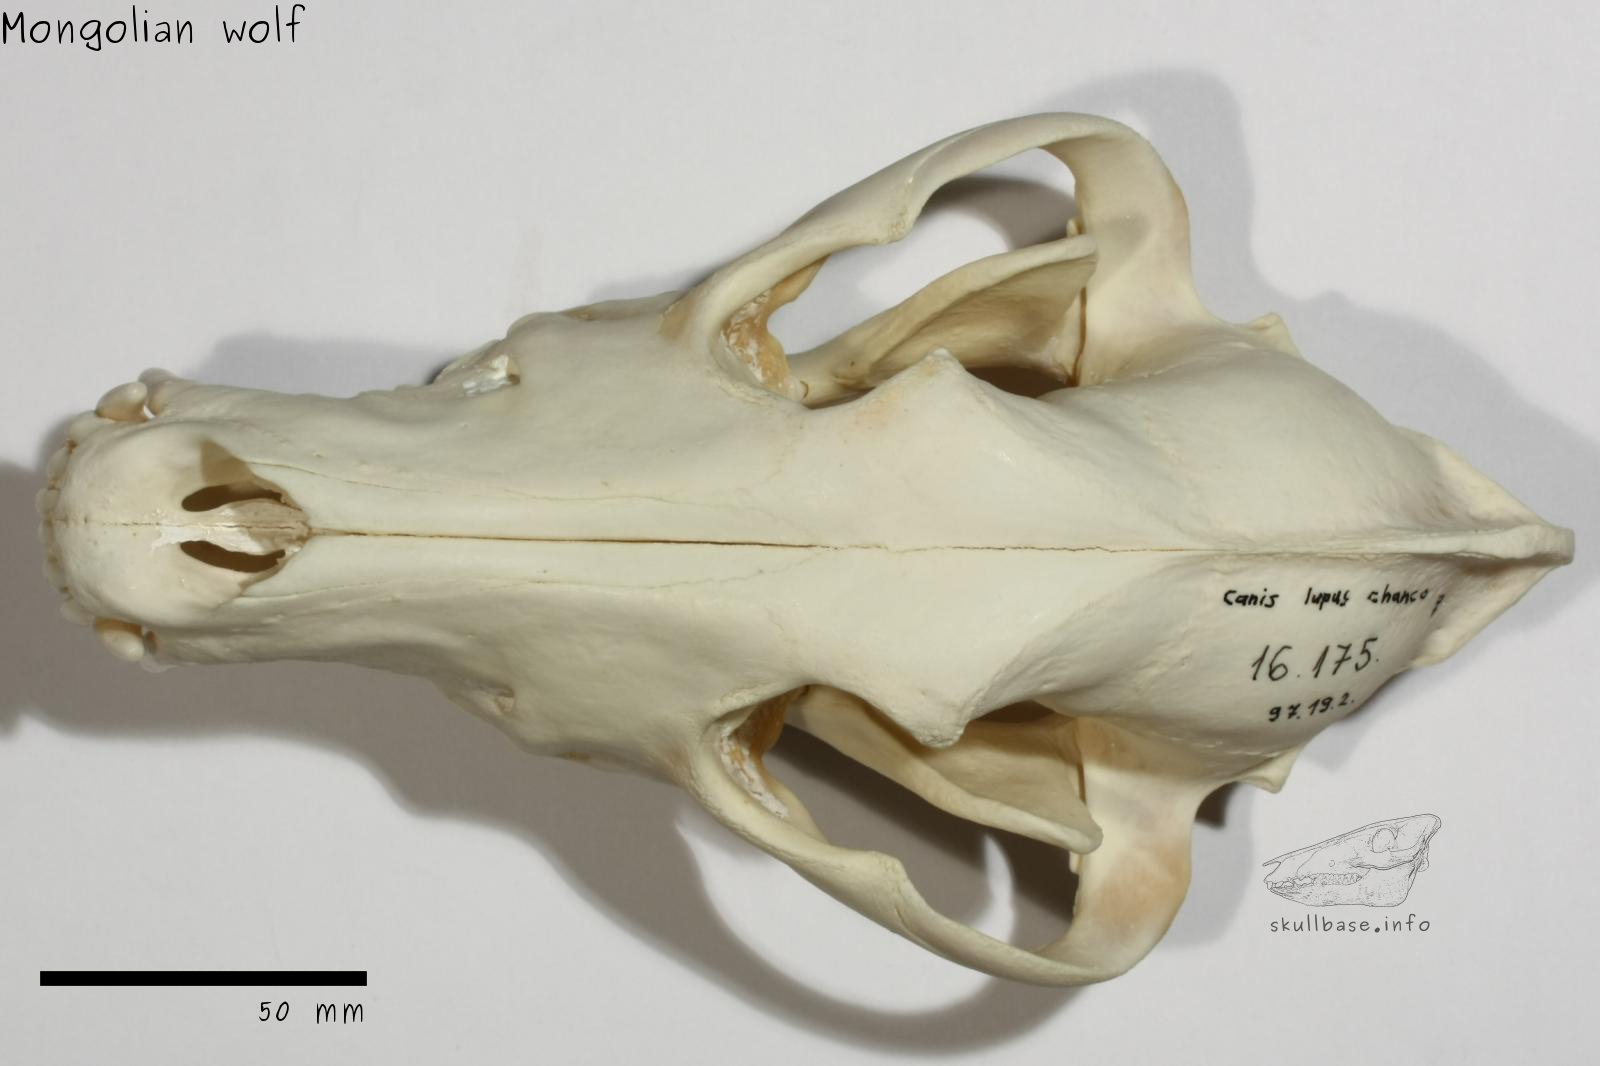 Mongolian wolf (Canis lupus chanco) skull dorsal view